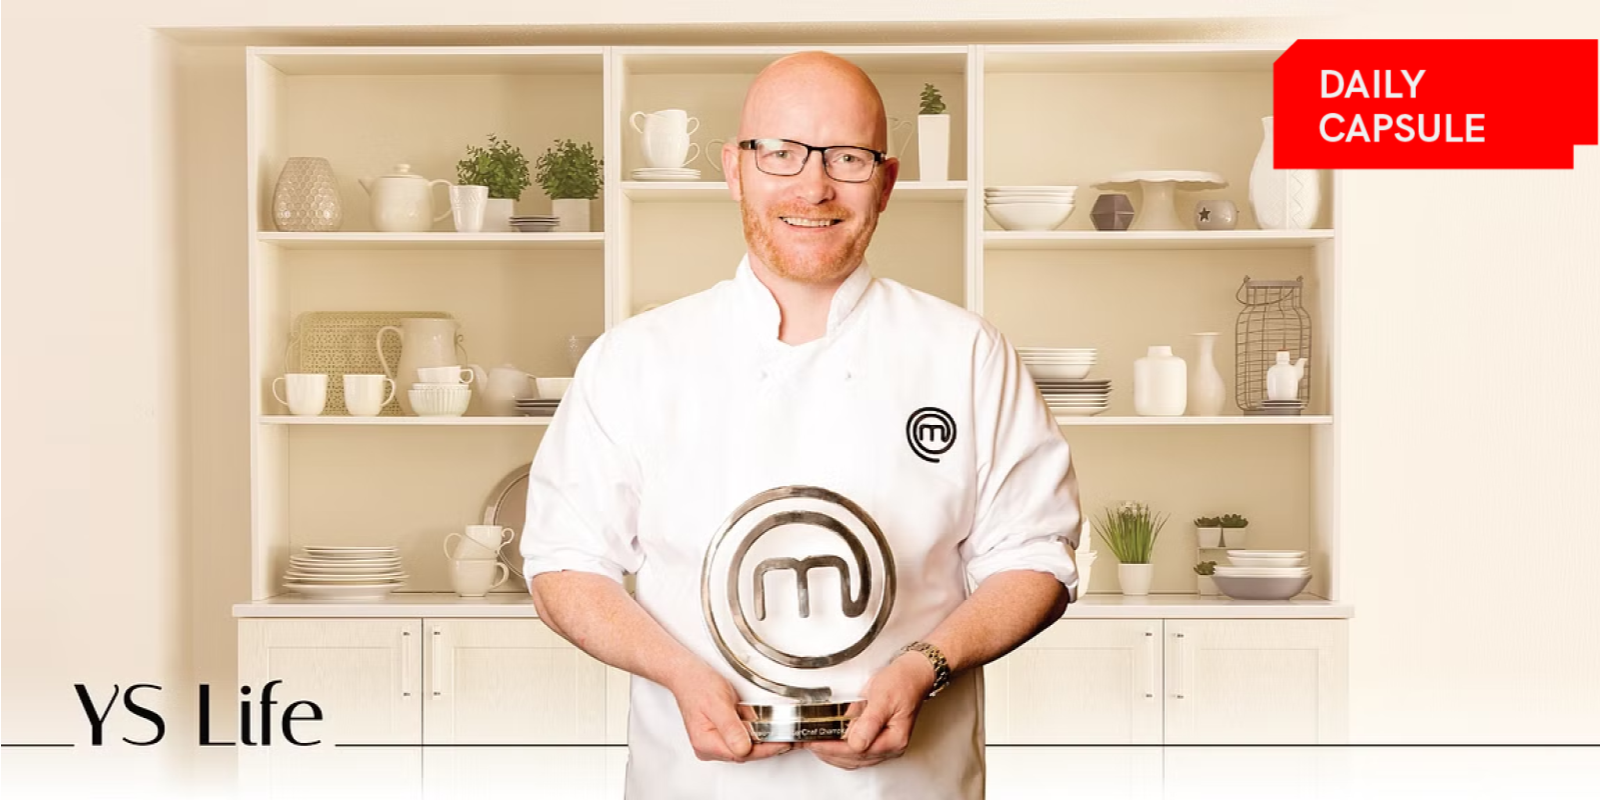 Scotland’s first national chef